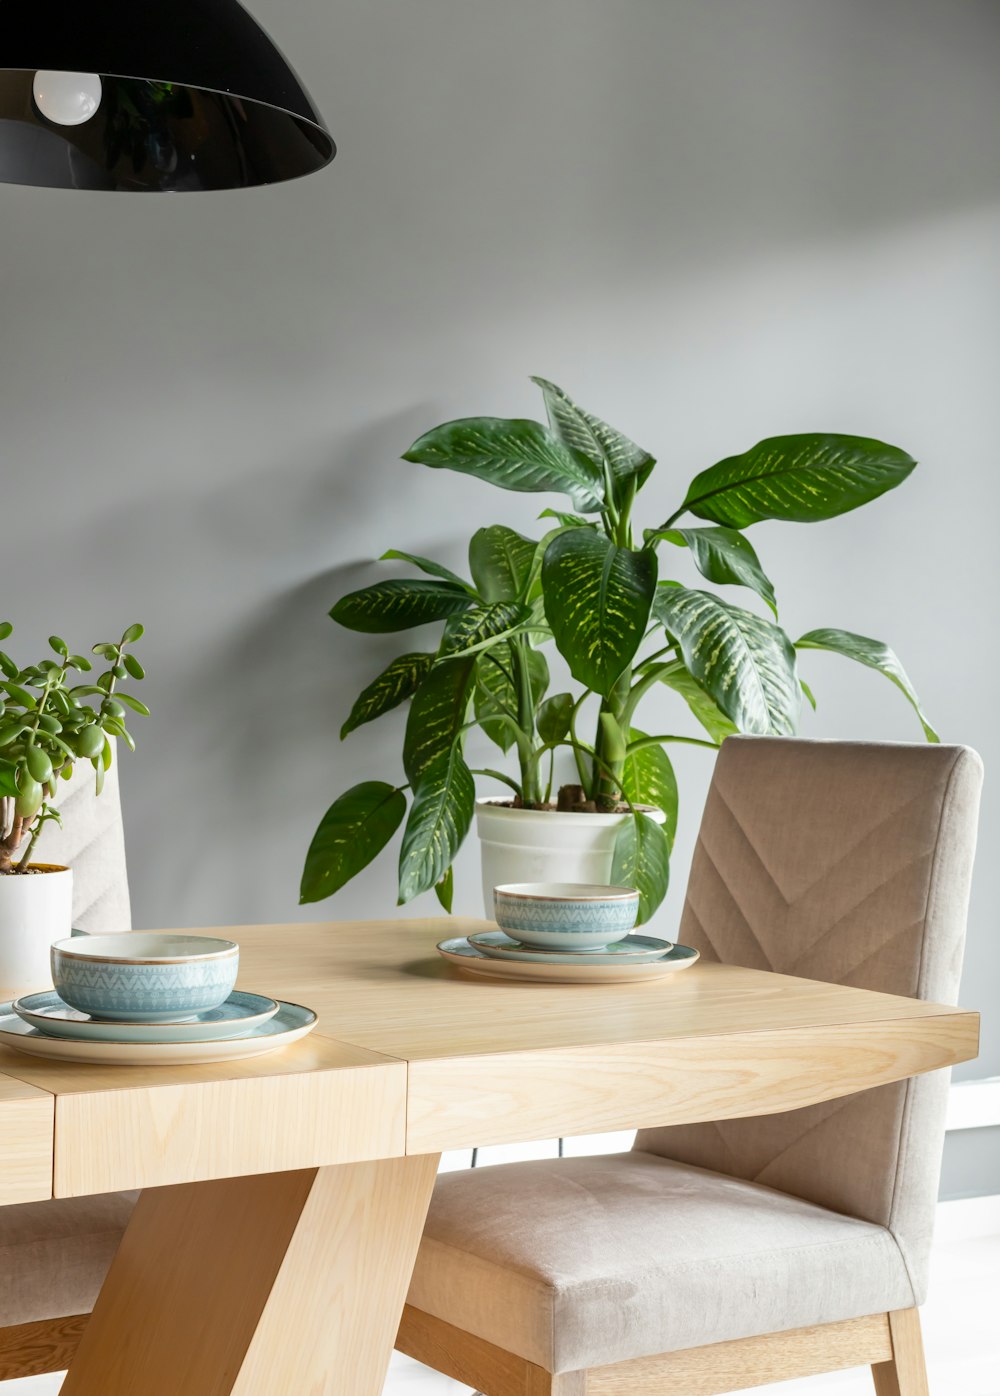 green plant on white ceramic bowl on brown wooden table